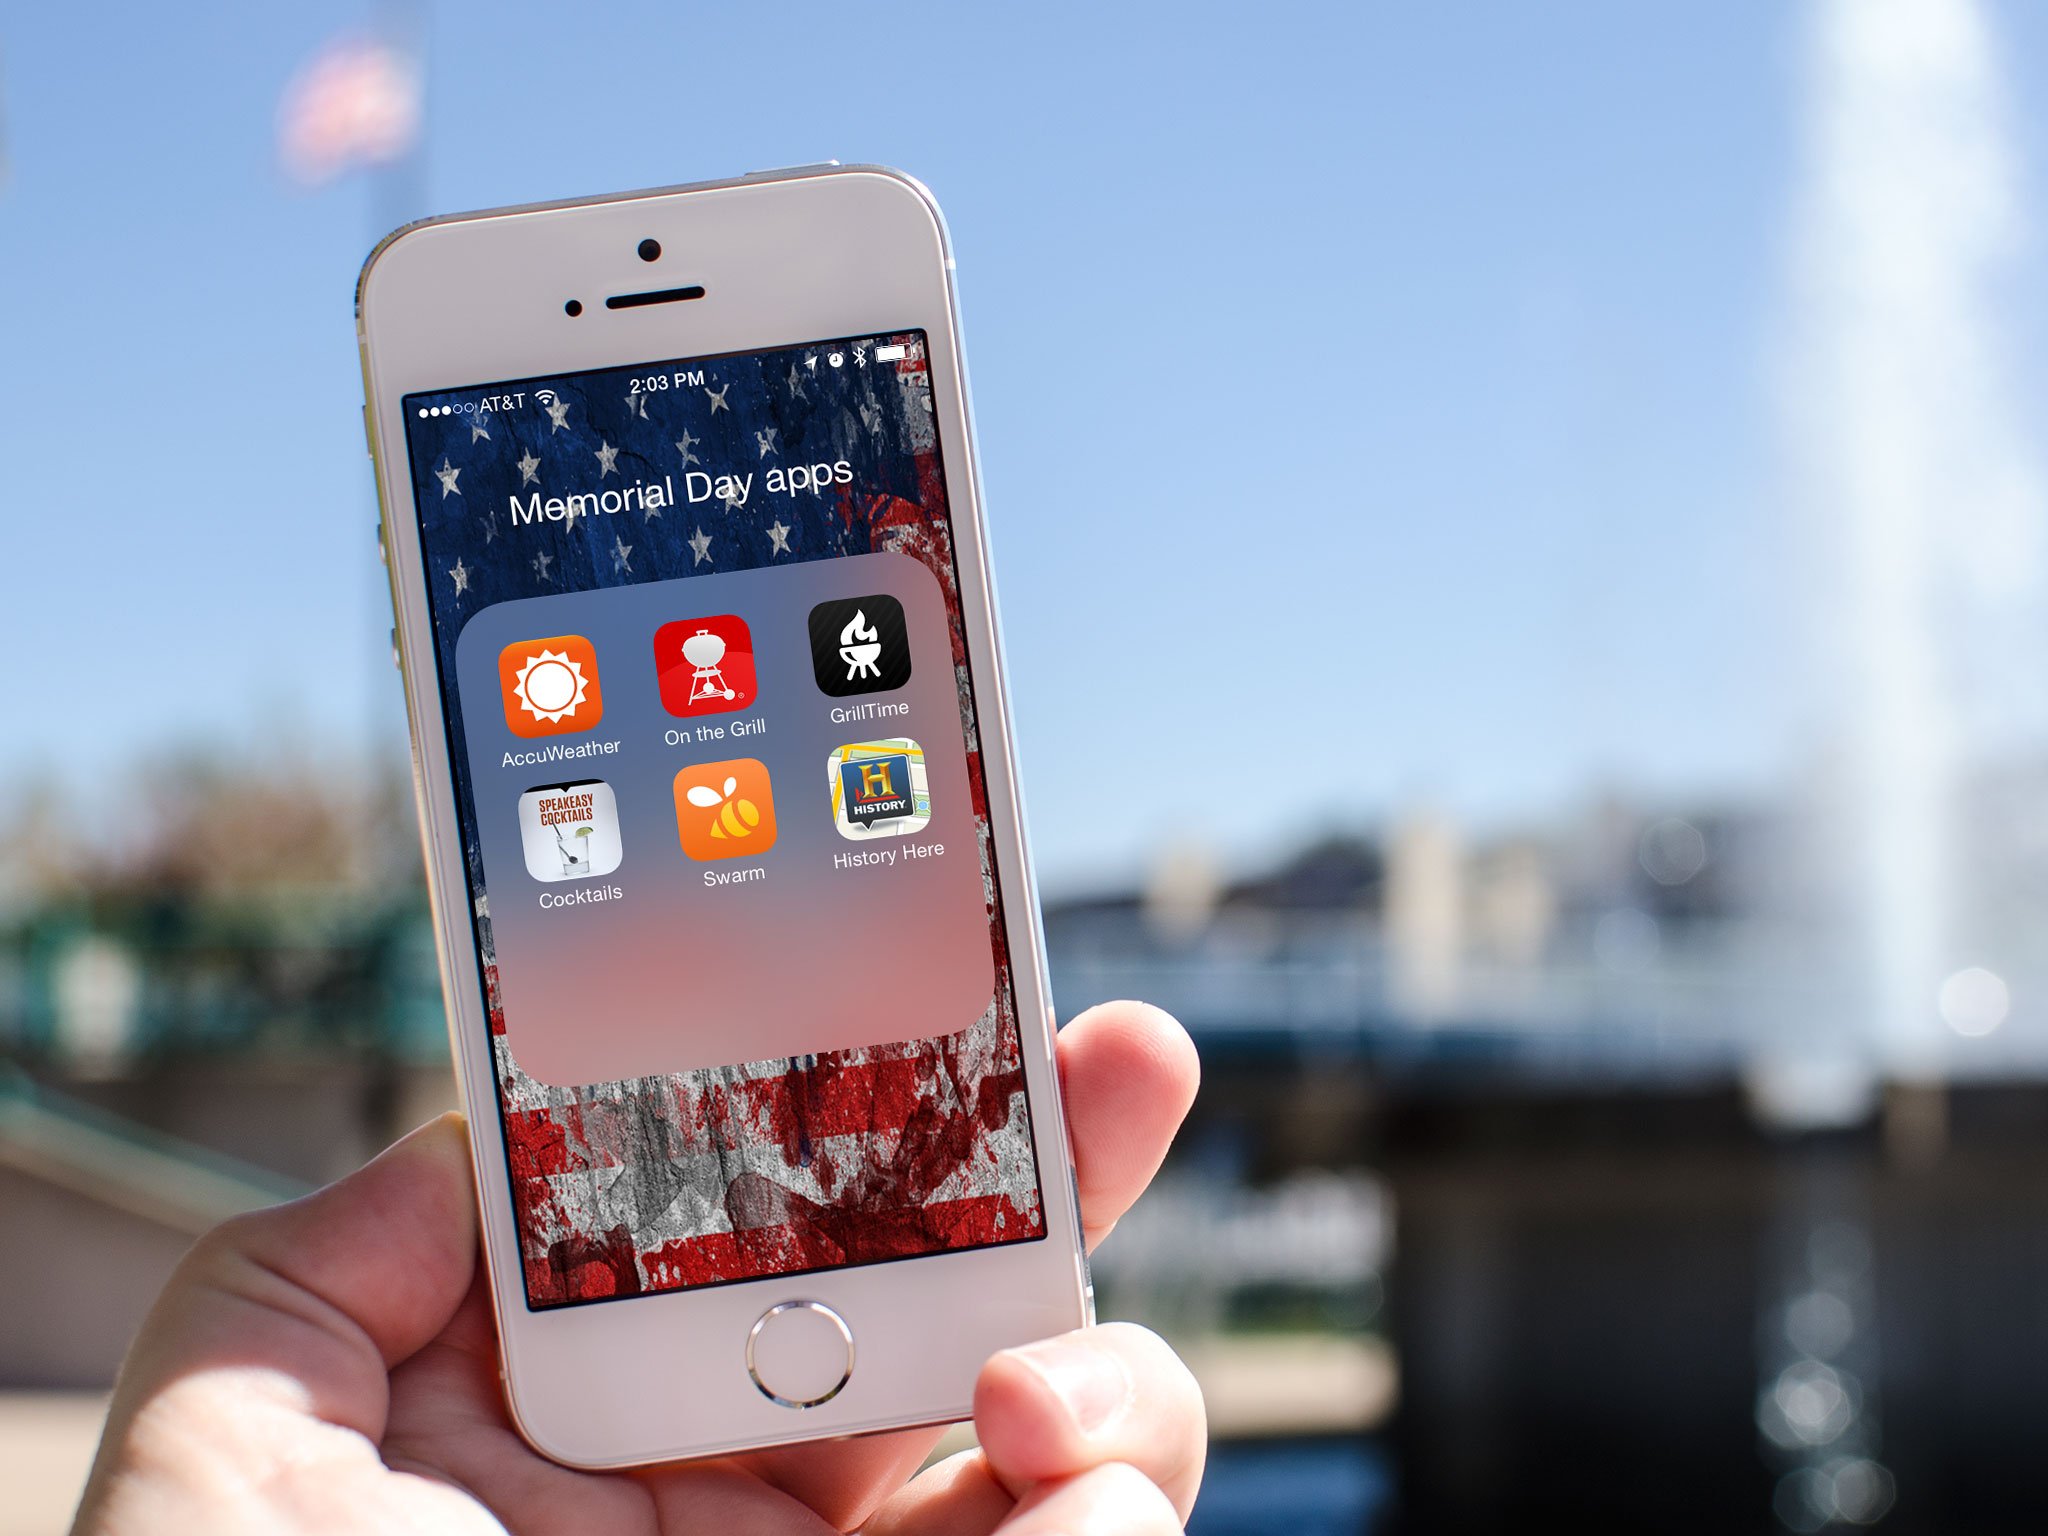 Best Memorial Day apps for iPhone and iPad: GrillTime, AccuWeather, HISTORY Here, and more!